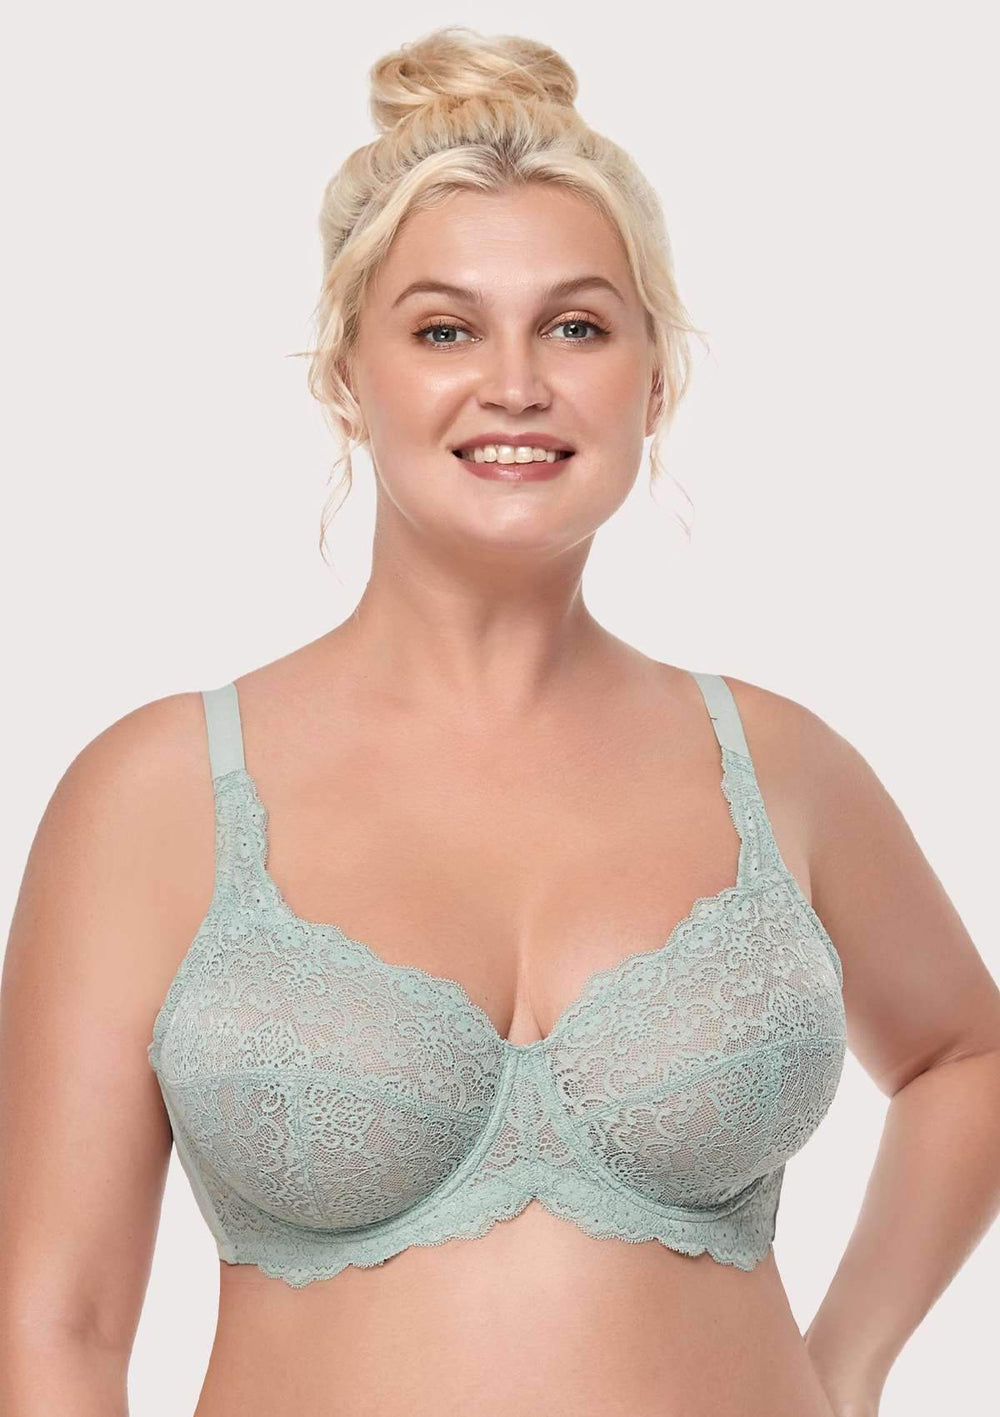 HSIA Bra Try On Haul  Up To Size DDD! Bra That Looks Good And